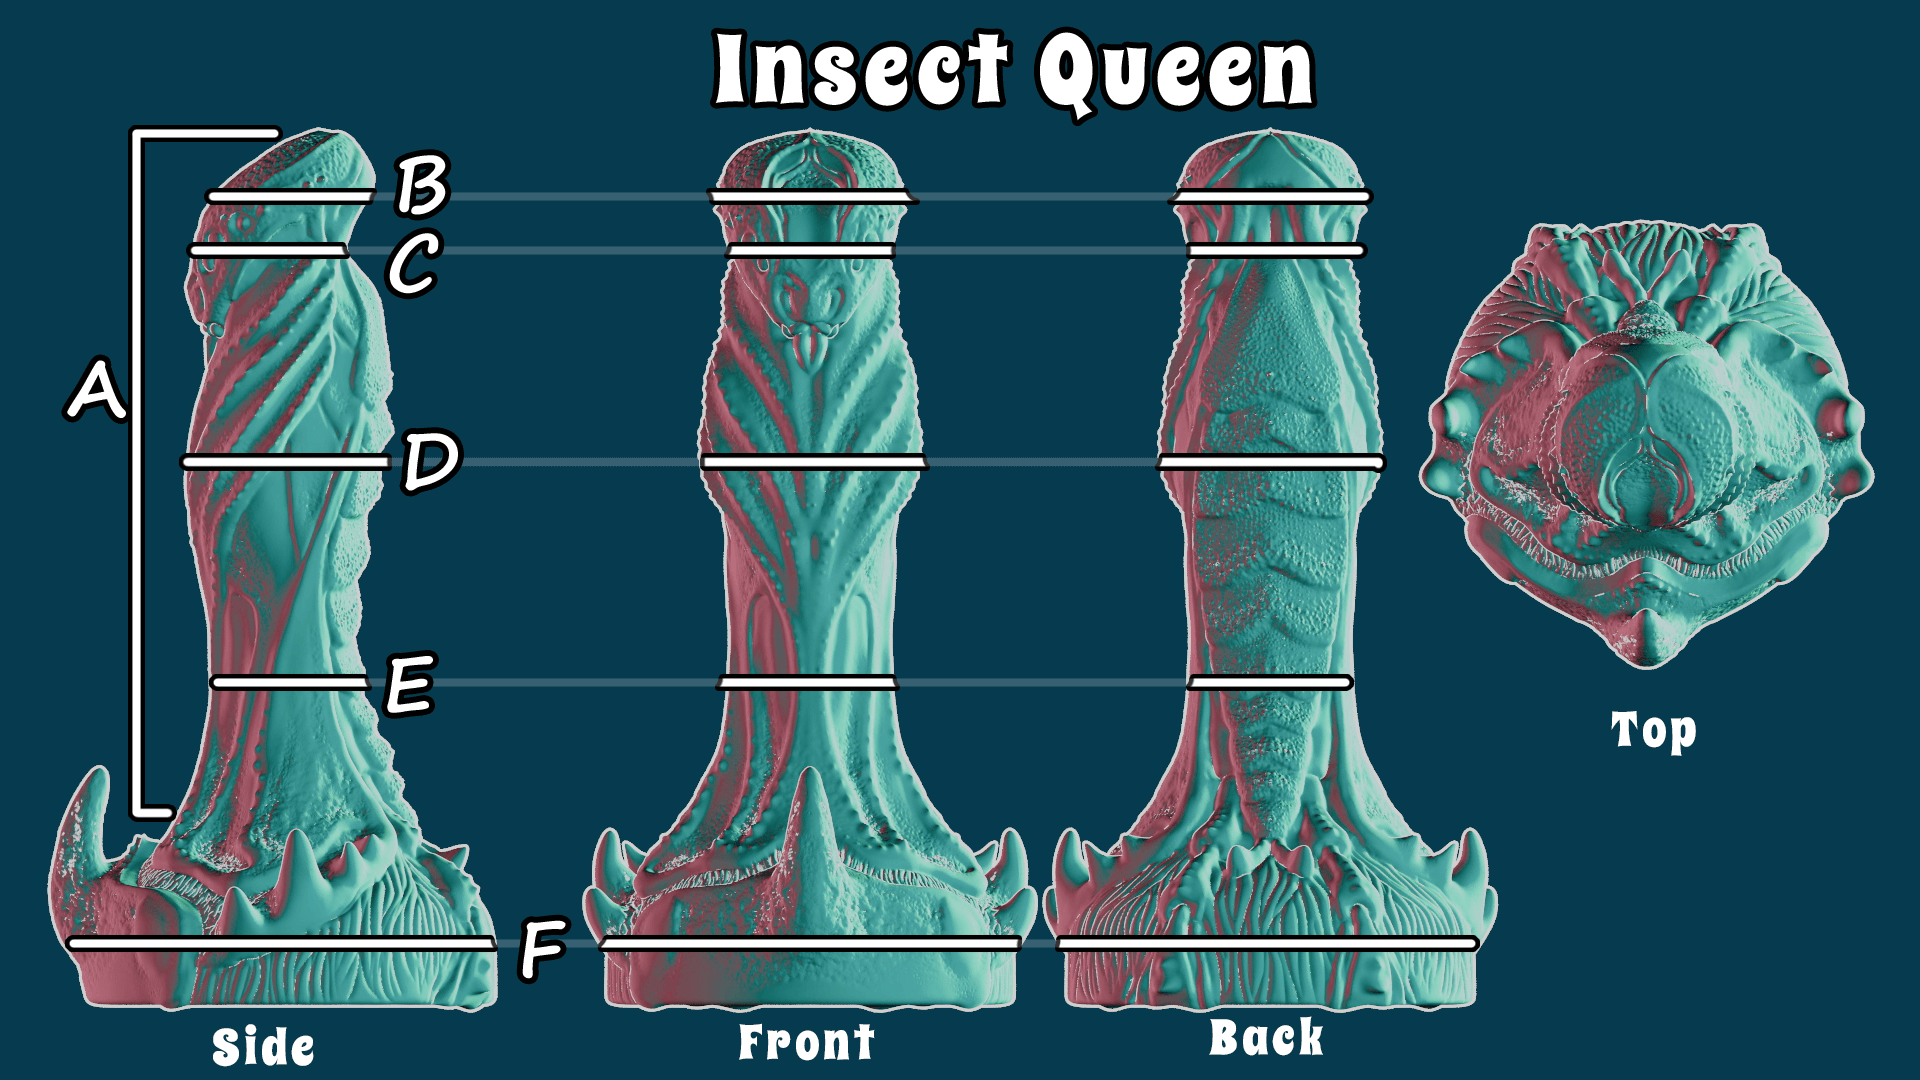 Insect Queen